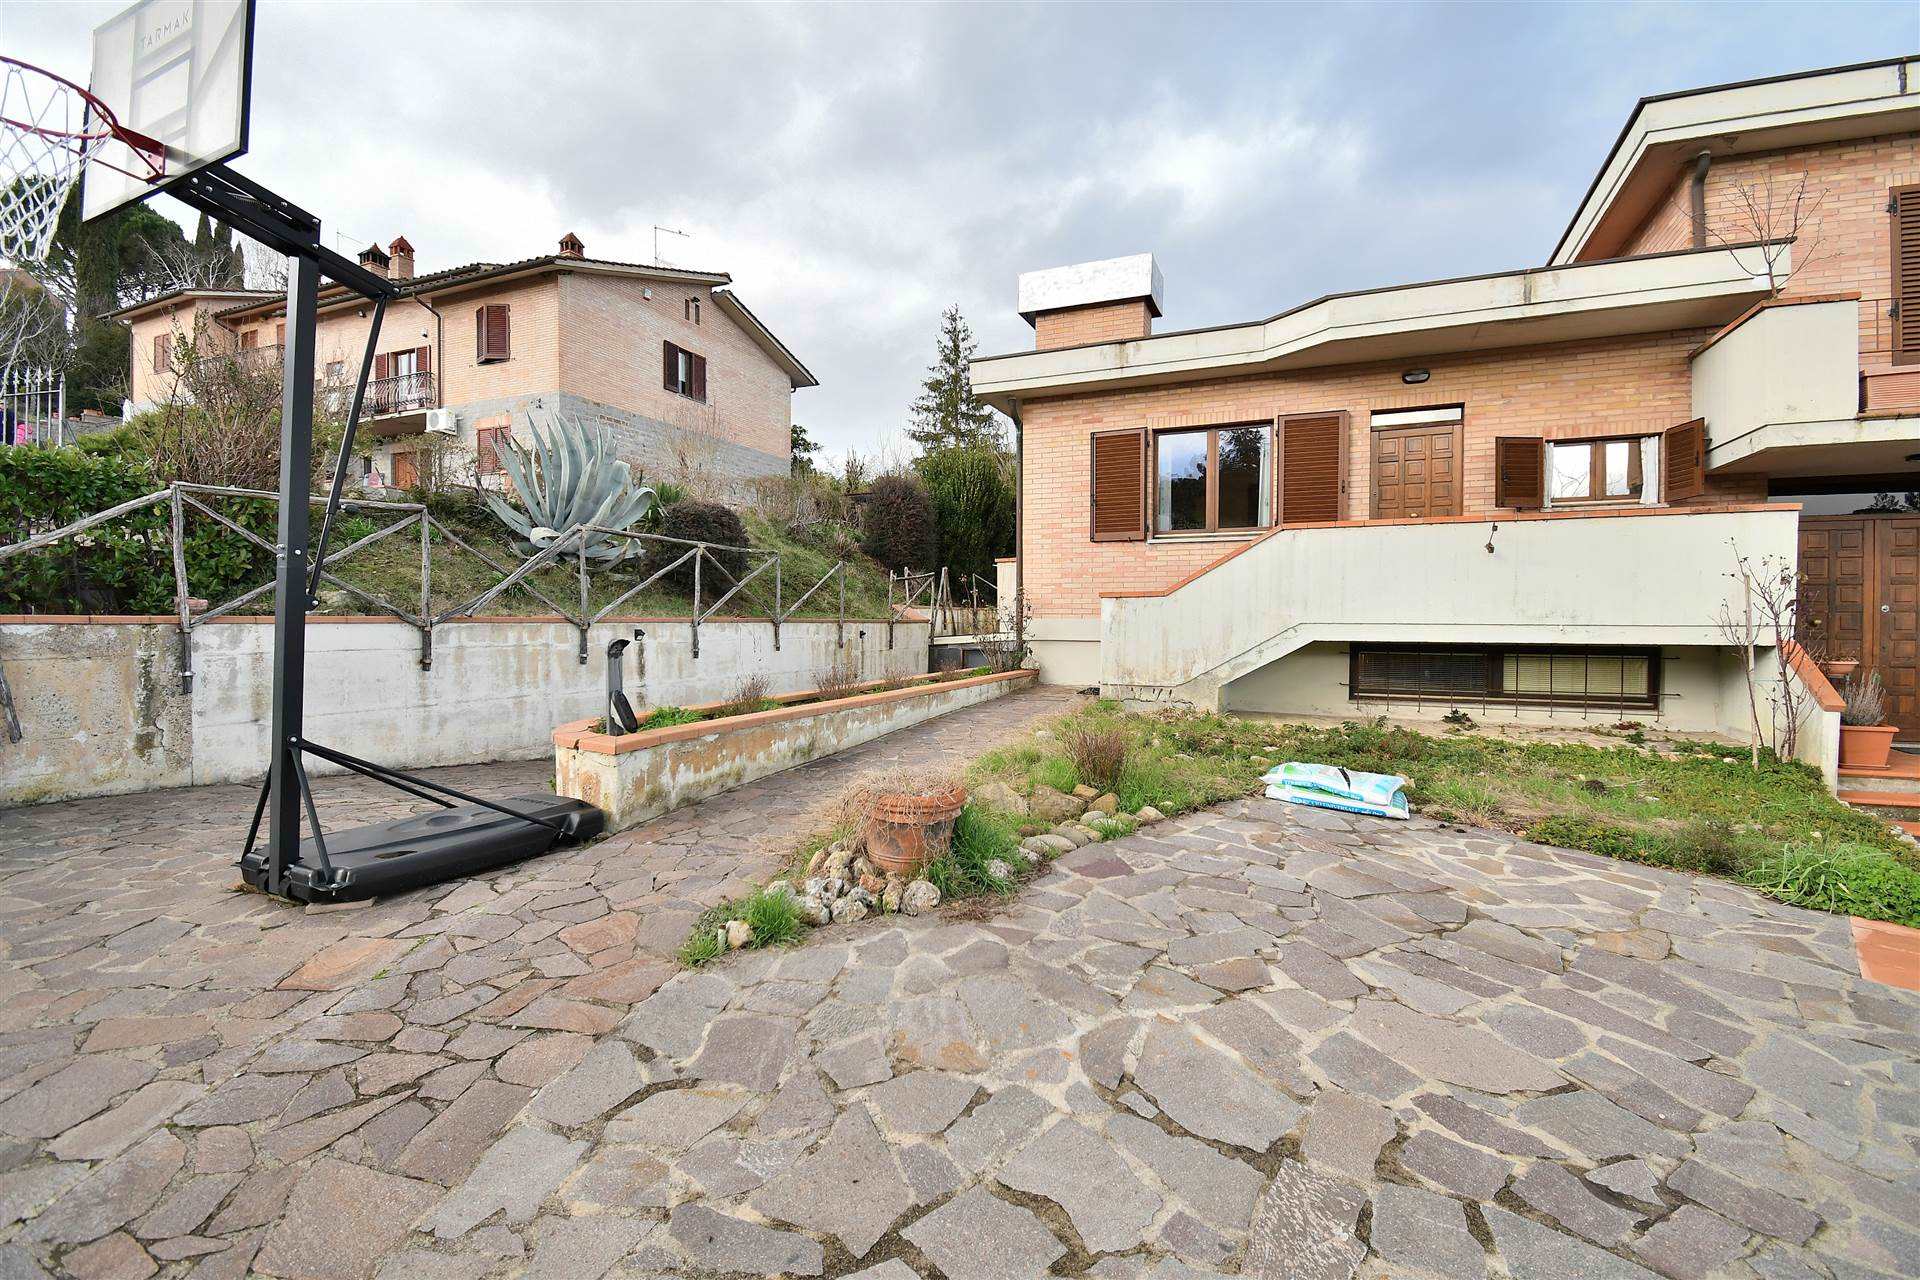 PONTE A BOZZONE, CASTELNUOVO BERARDENGA, Apartment for sale of 68 Sq. mt., Excellent Condition, Heating Individual heating system, Energetic class: D,